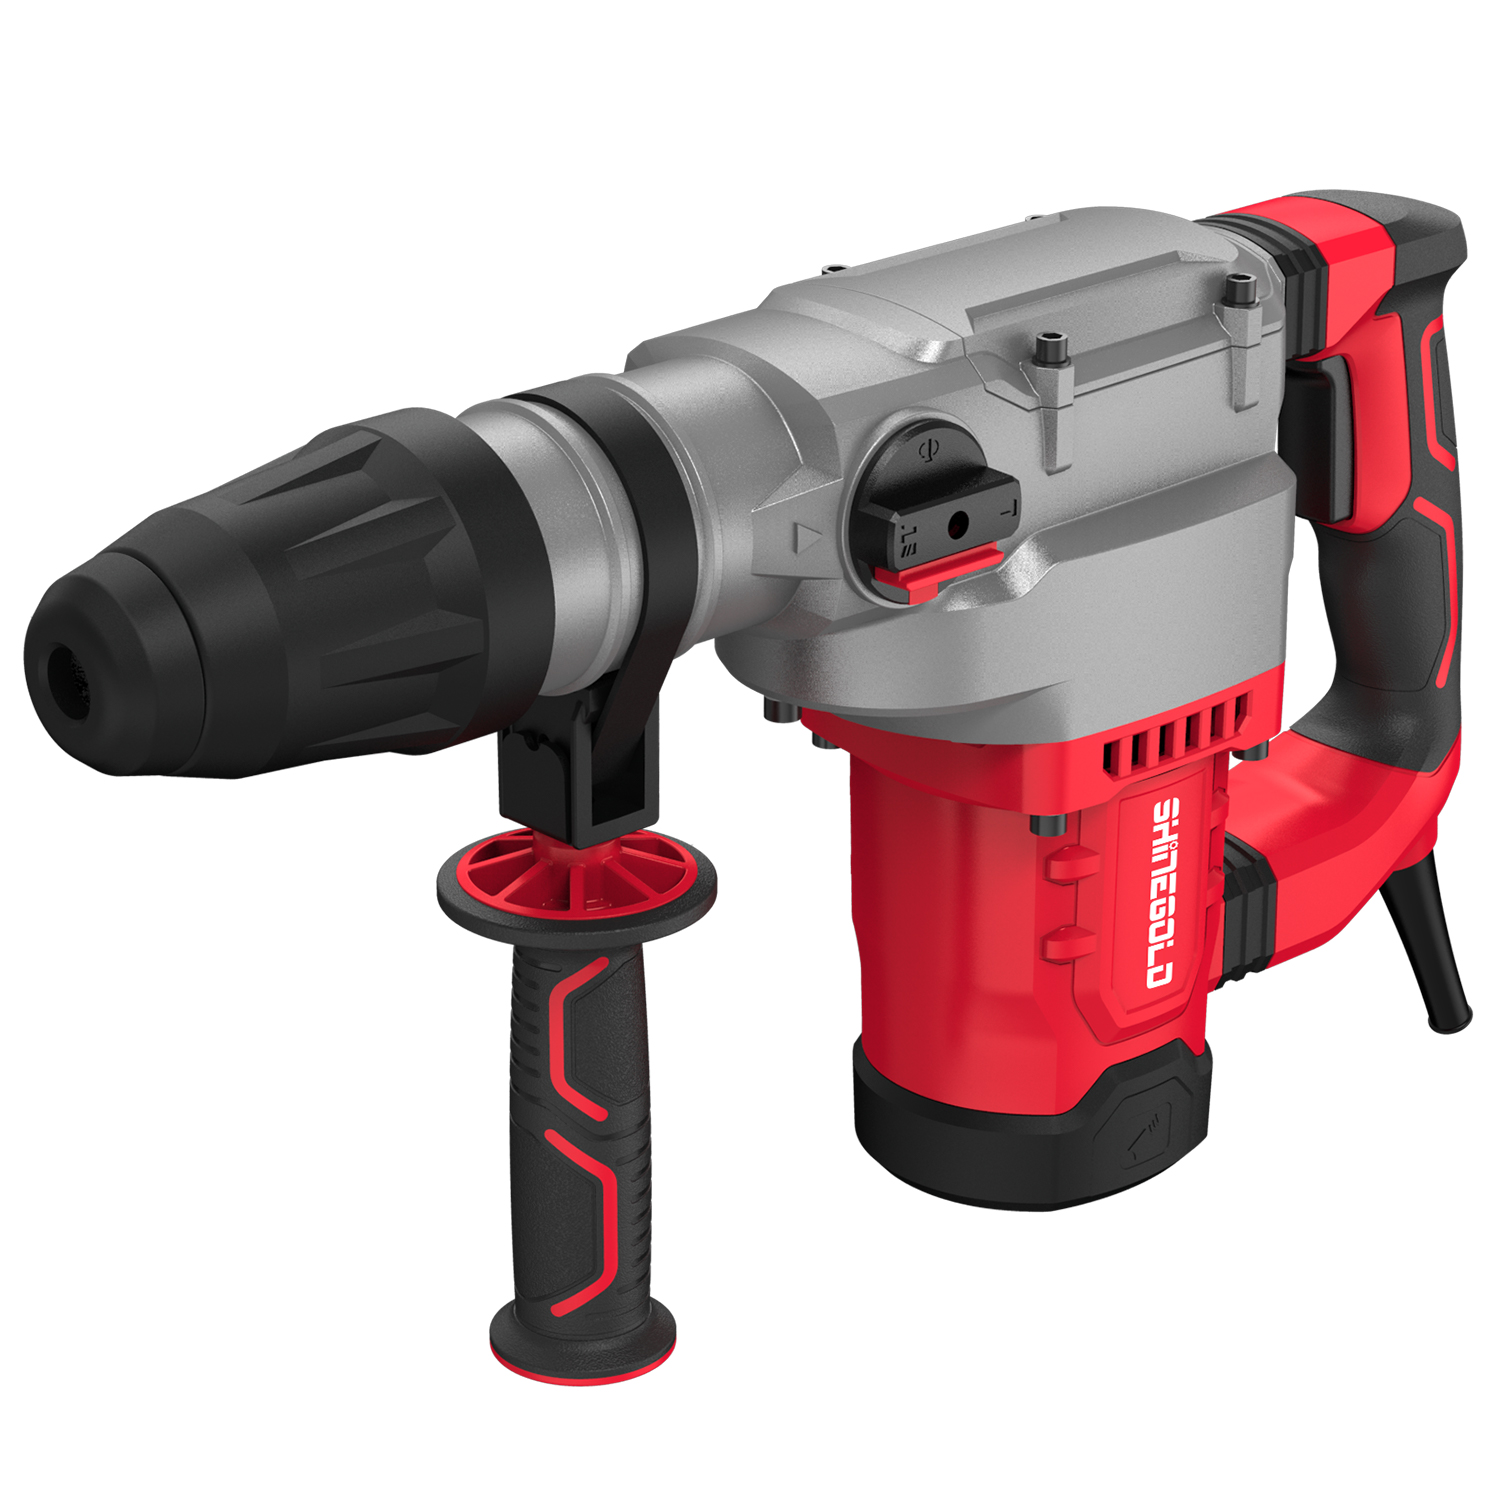 What does an electric impact drill do?